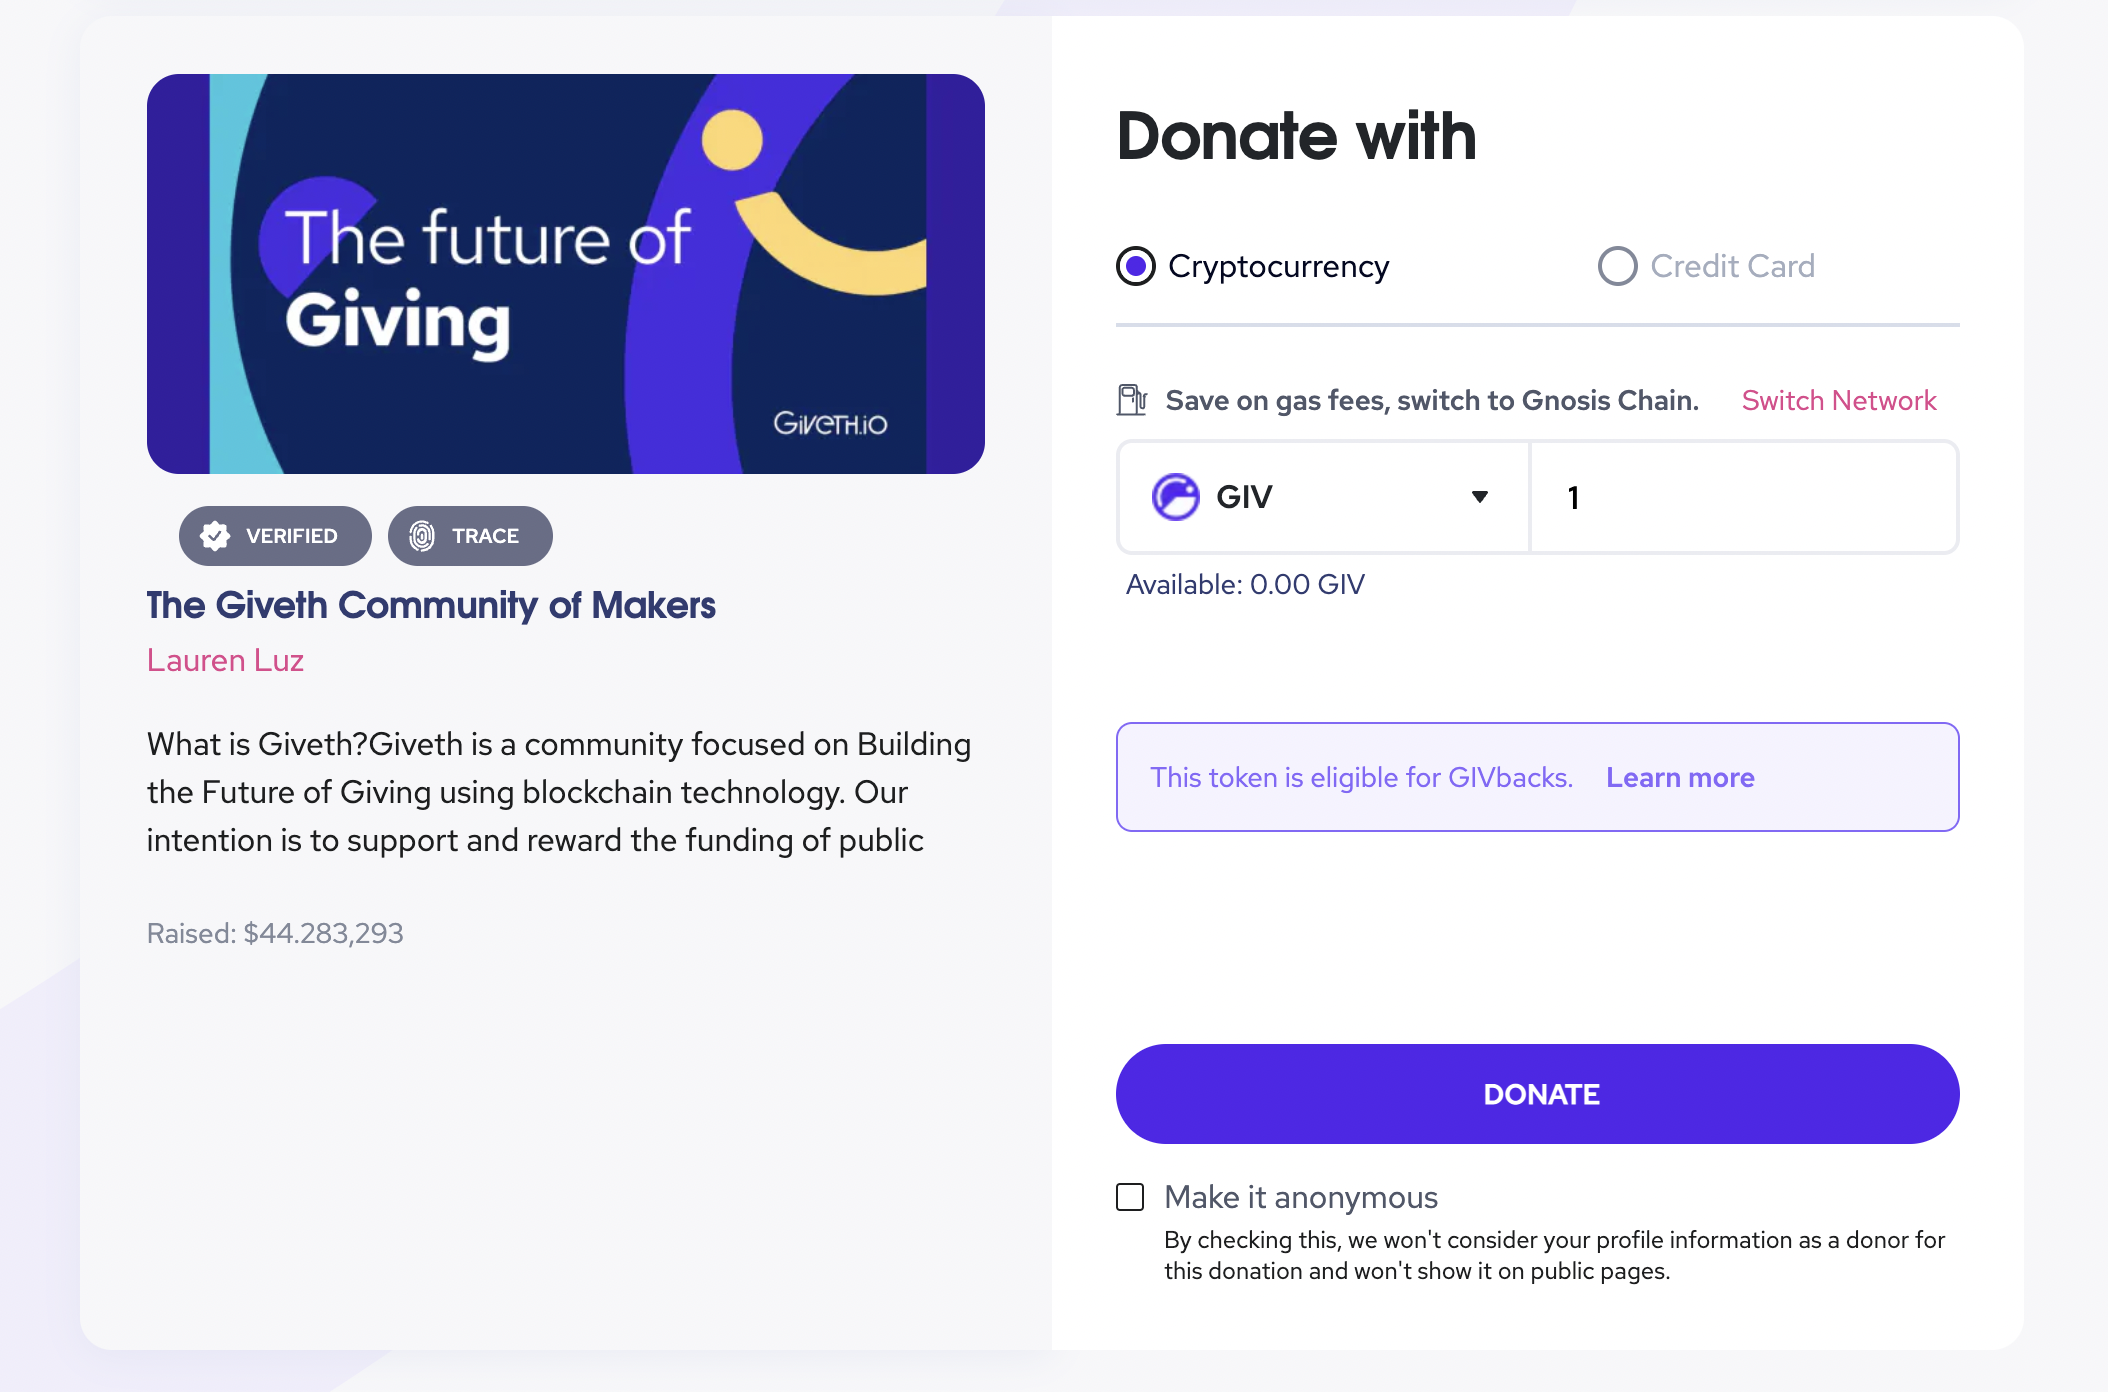 Donating to the Project